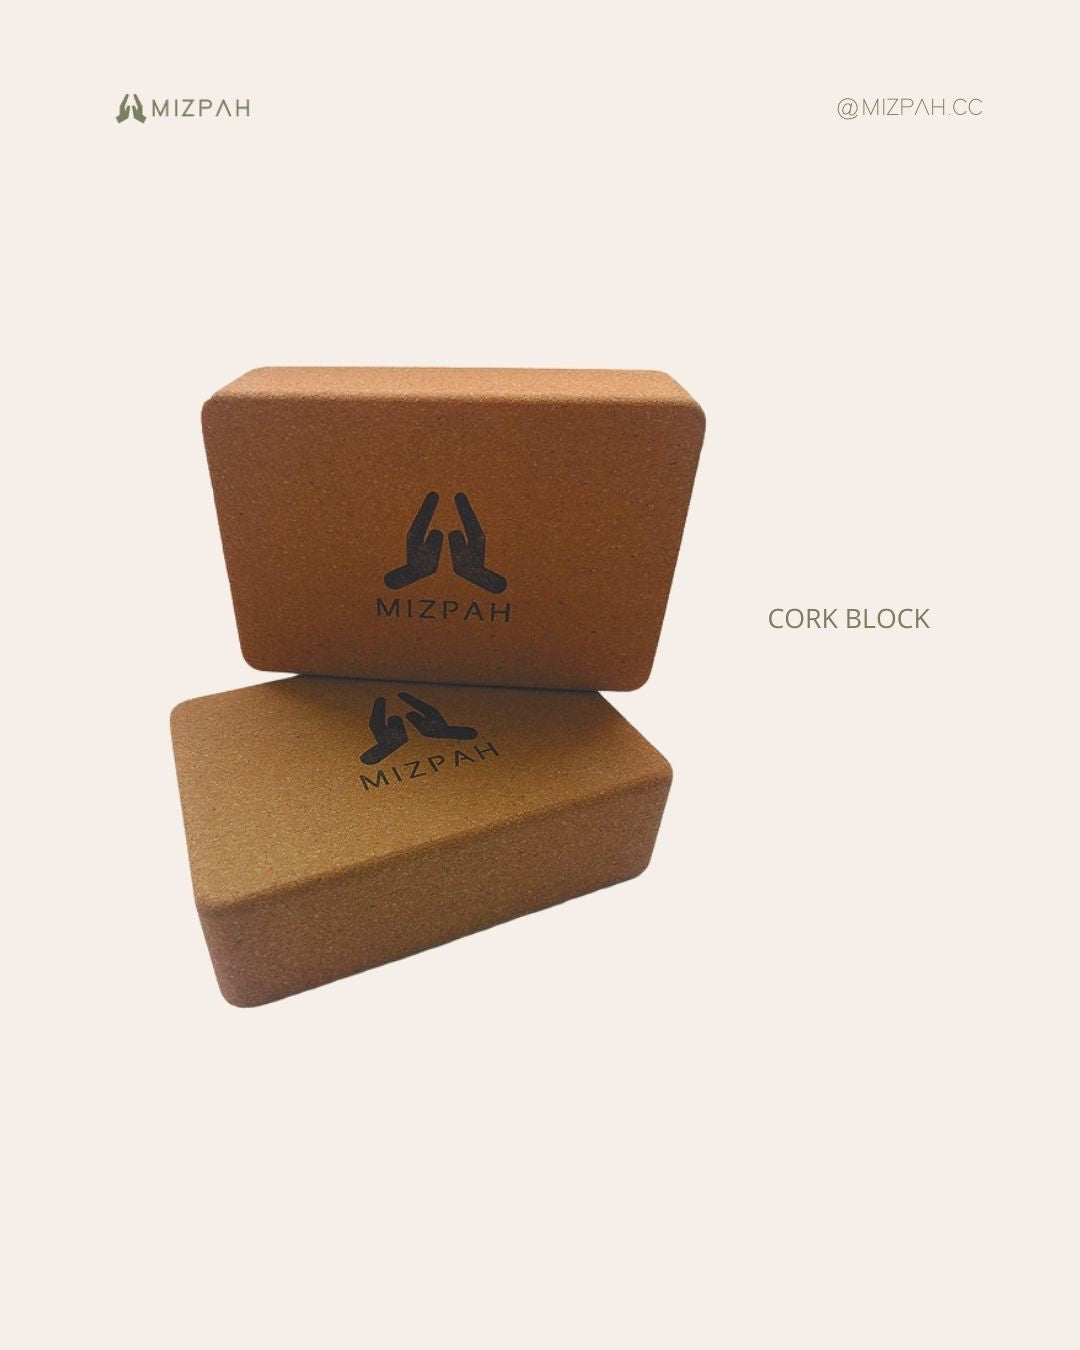 Octagon Cork Brick. Designed for smooth transitions and weighted for stability, the block’s extra angles allow for easy and smooth pose transitions to enhance flow or restorative movements.